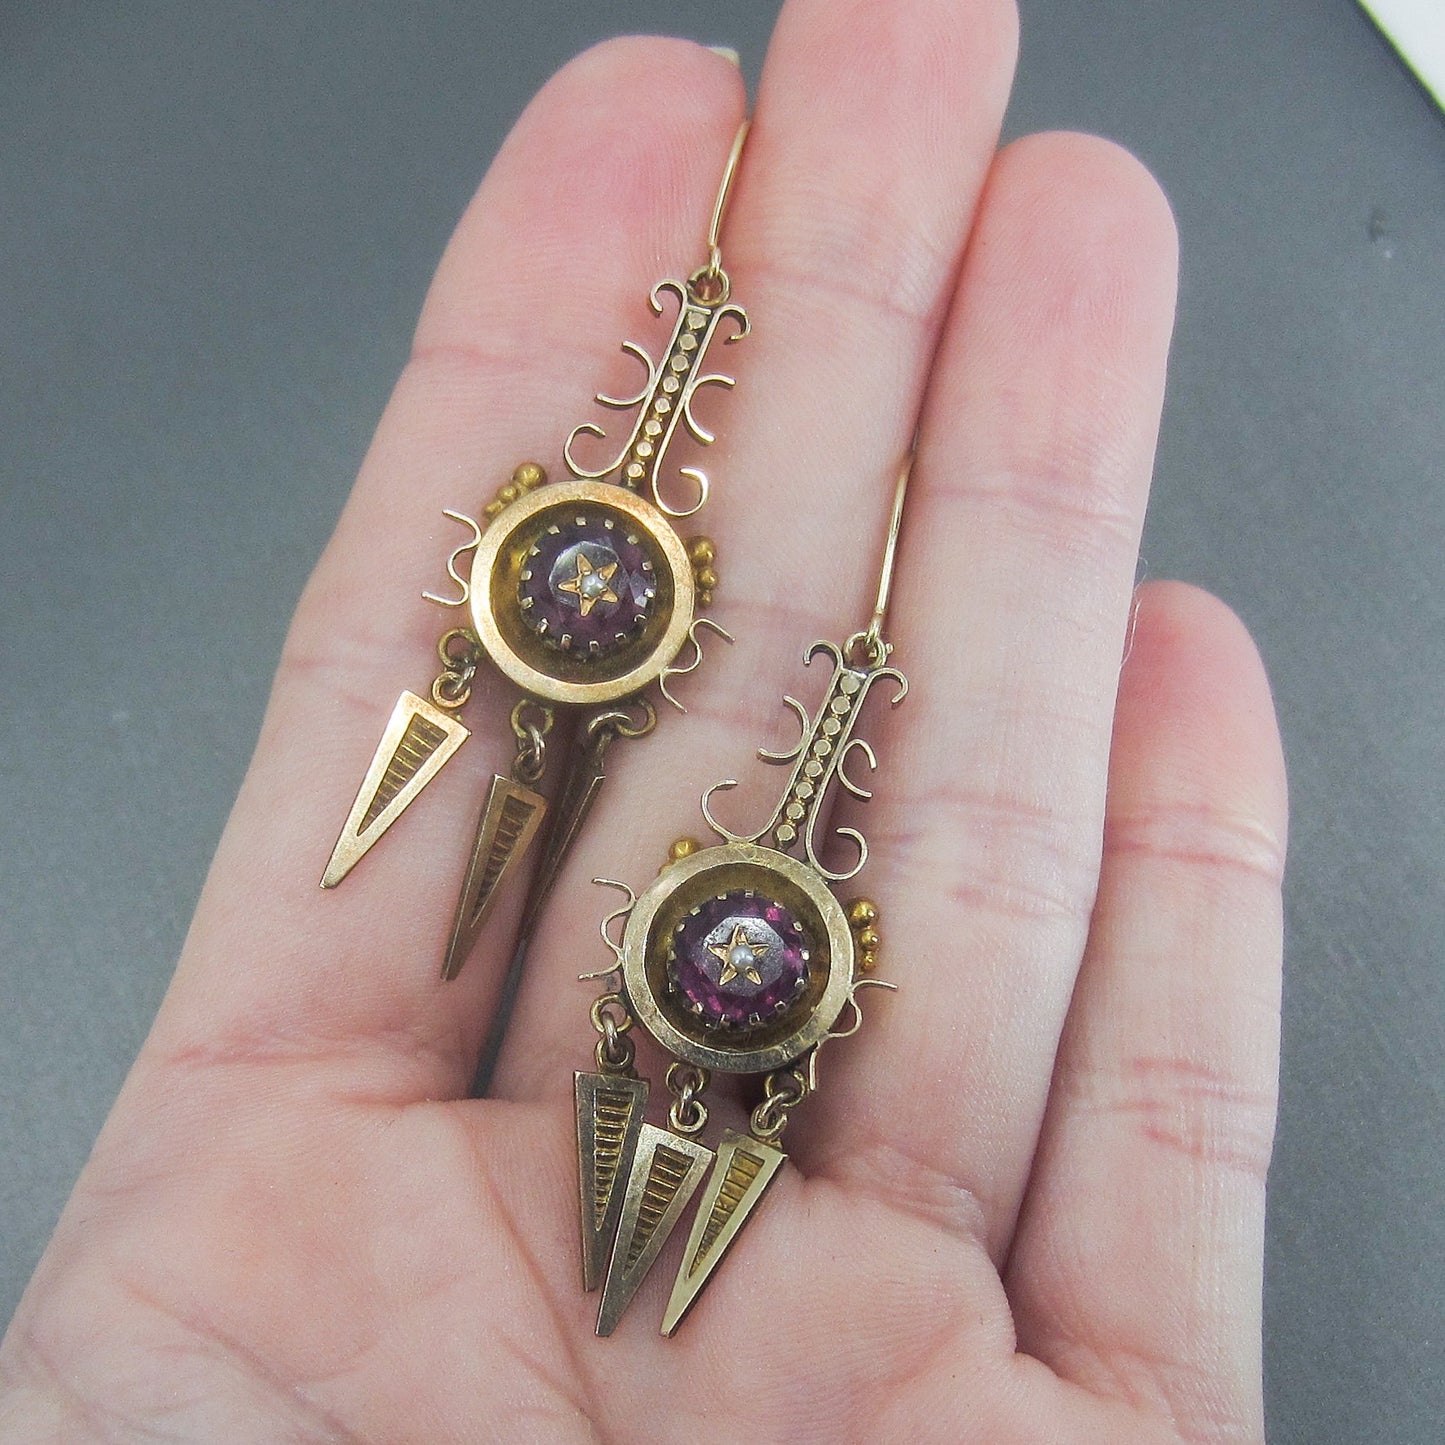 SOLD-Victorian Etruscan Revival Amethyst and Pearl Earrings 12k c. 1880